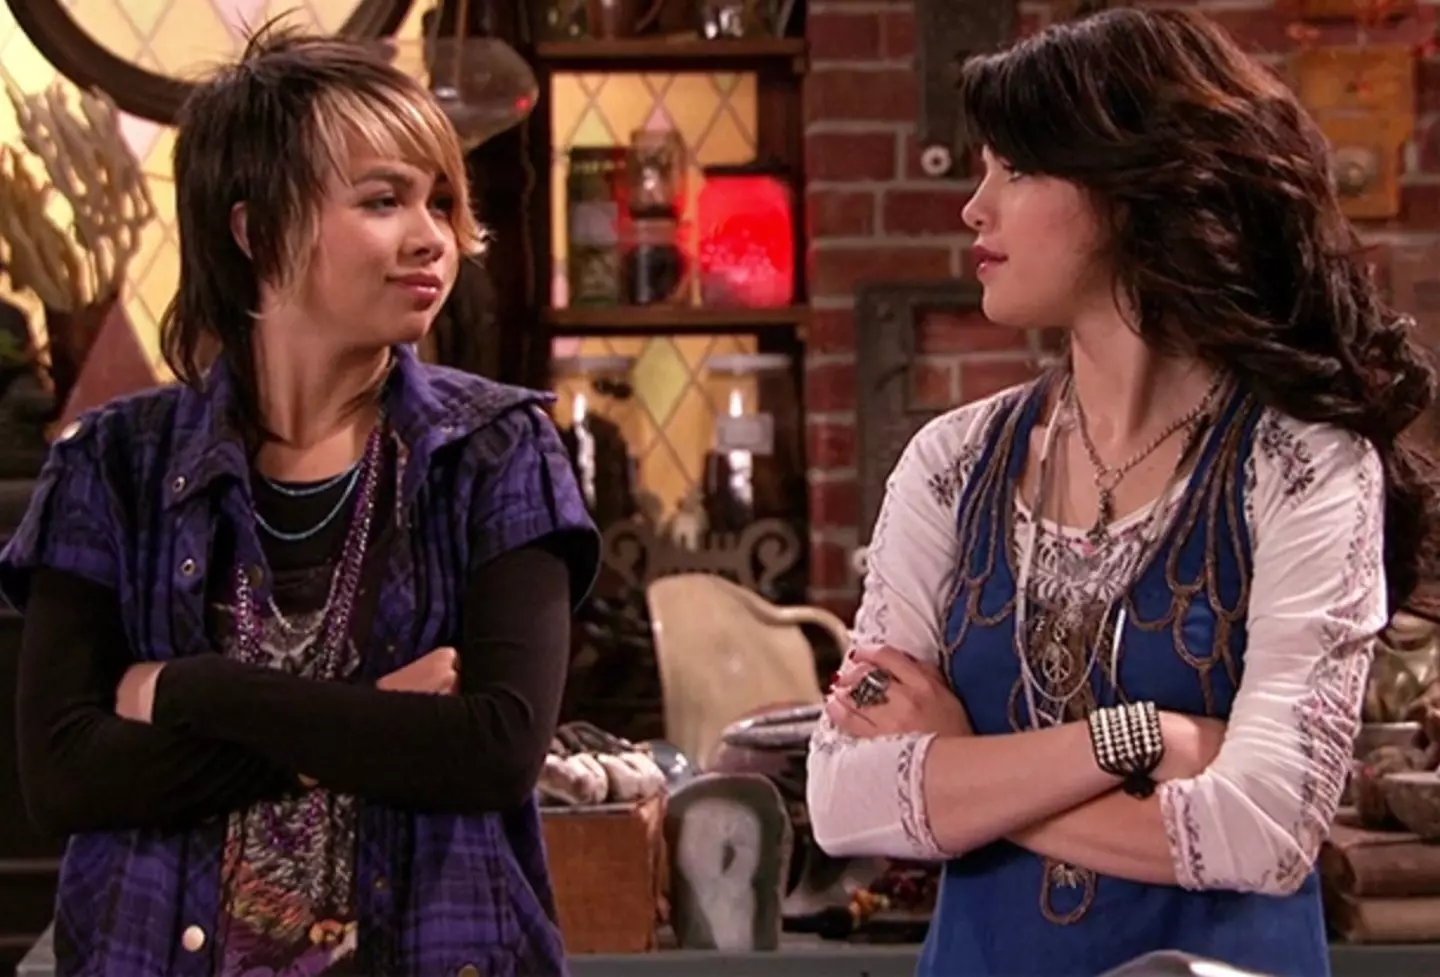 Alex and Stevie in Wizards of Waverly Place.